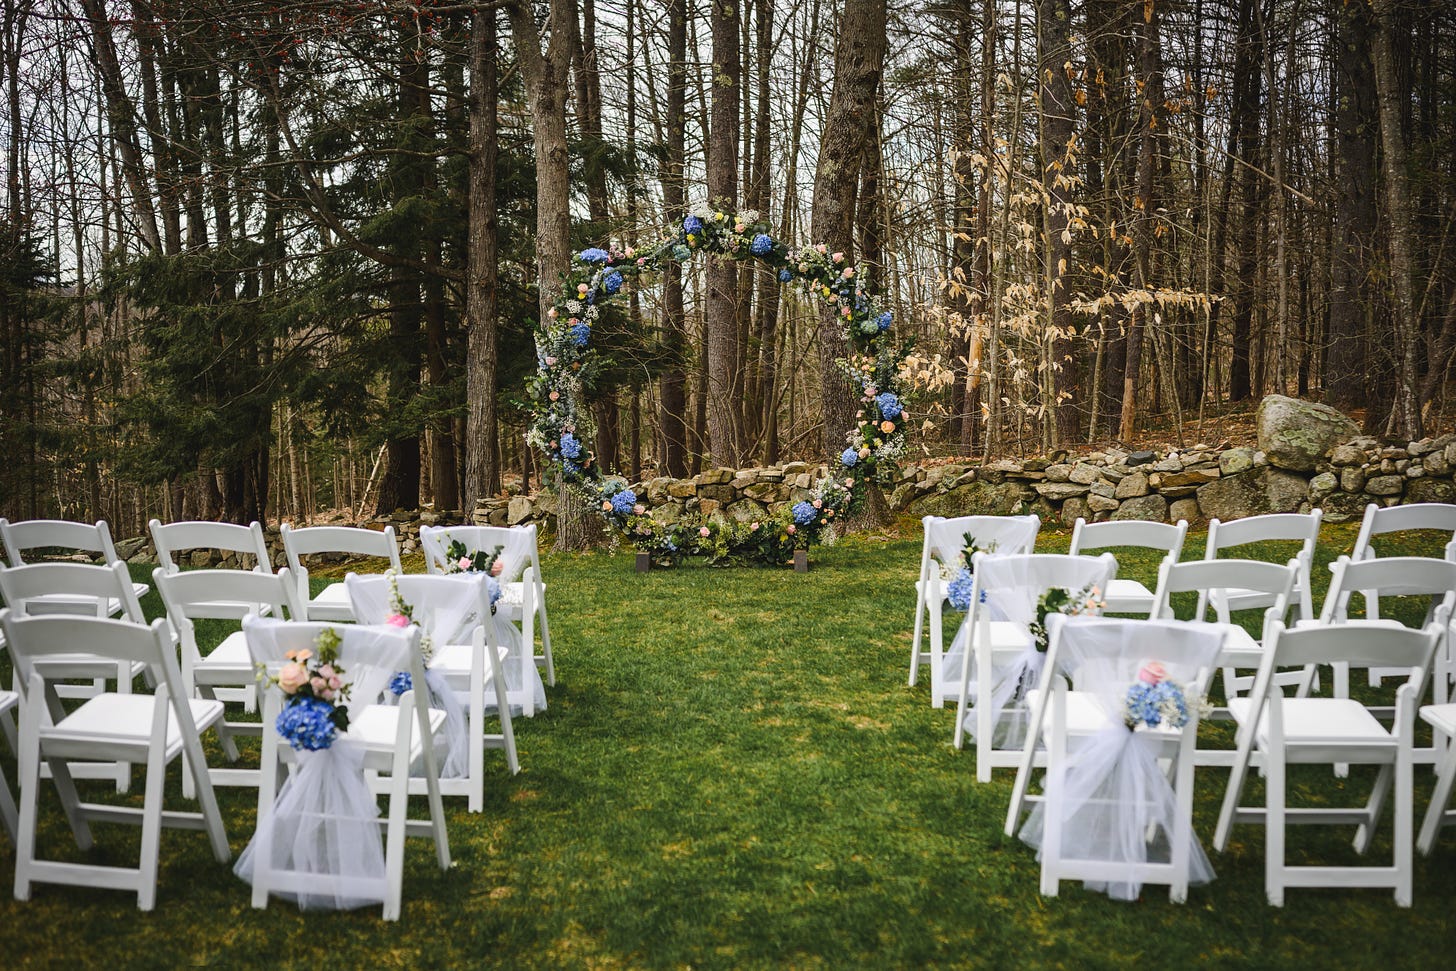 A circular, floral, wedding arbor and empty chairs before a wedding ceremony